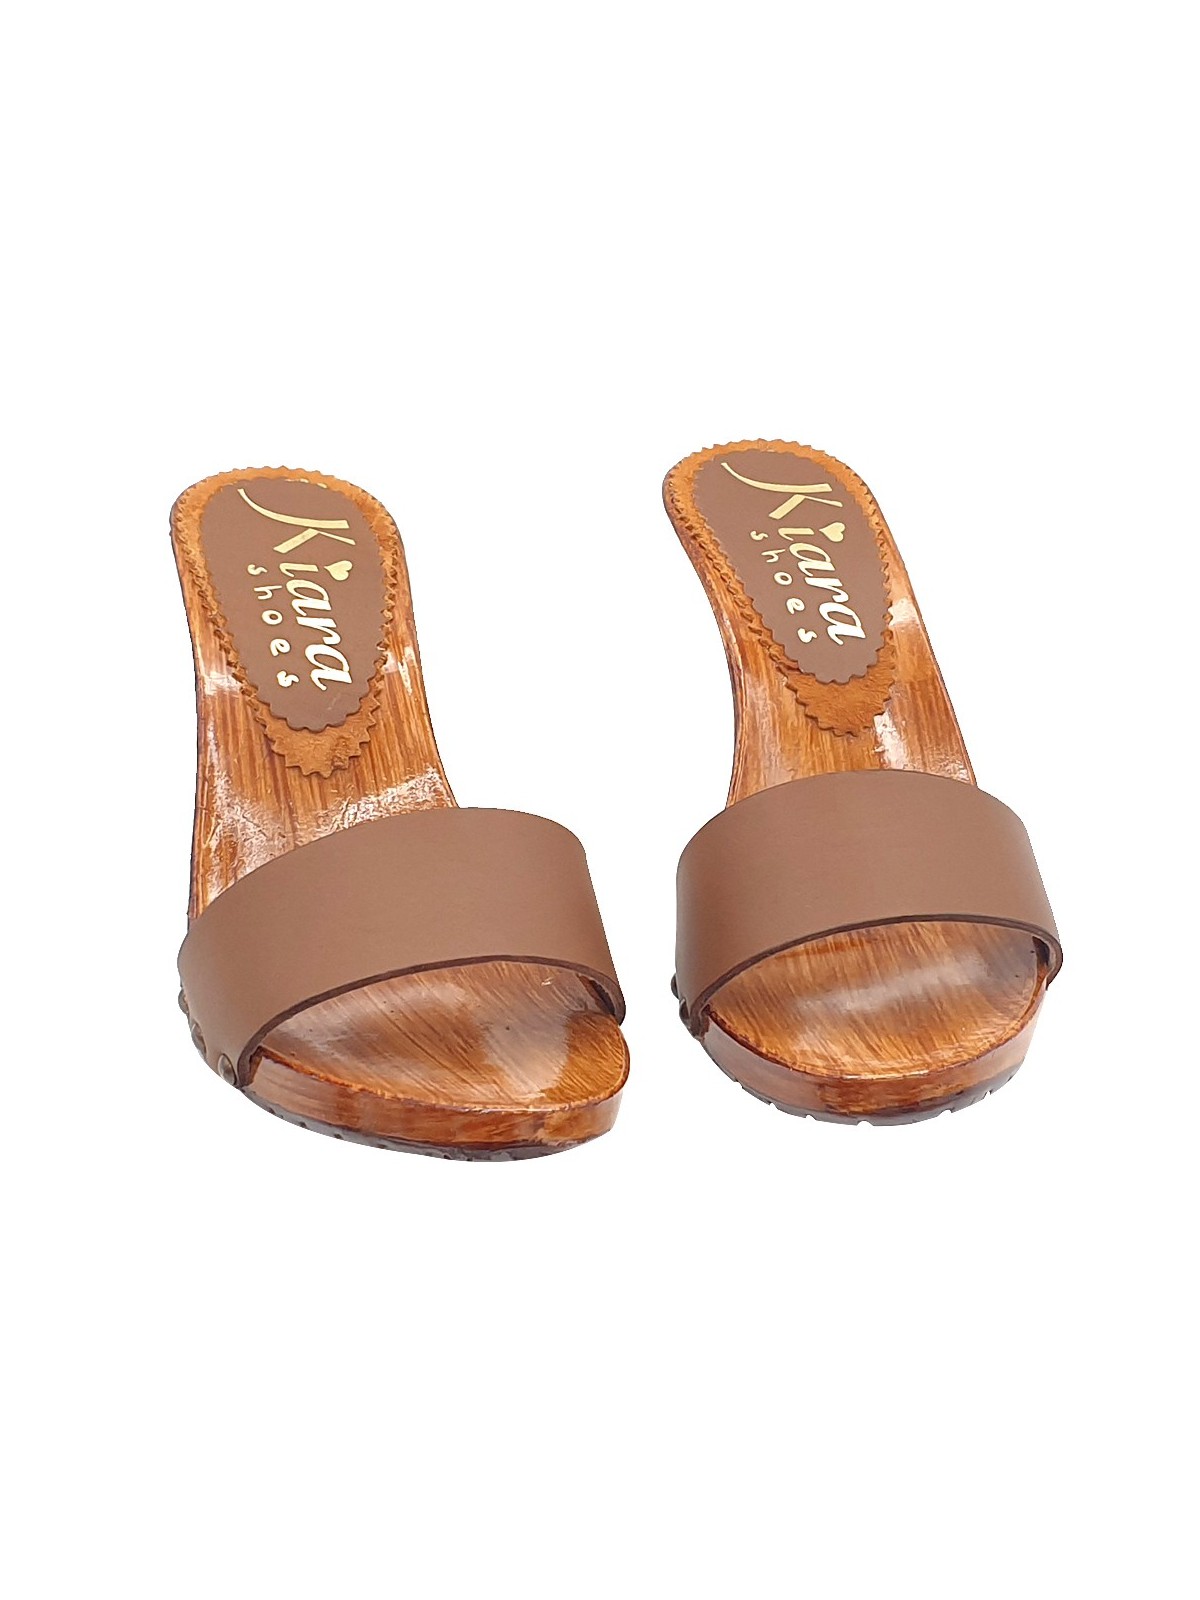 WOMEN'S CLOGS WITH BROWN LEATHER BAND